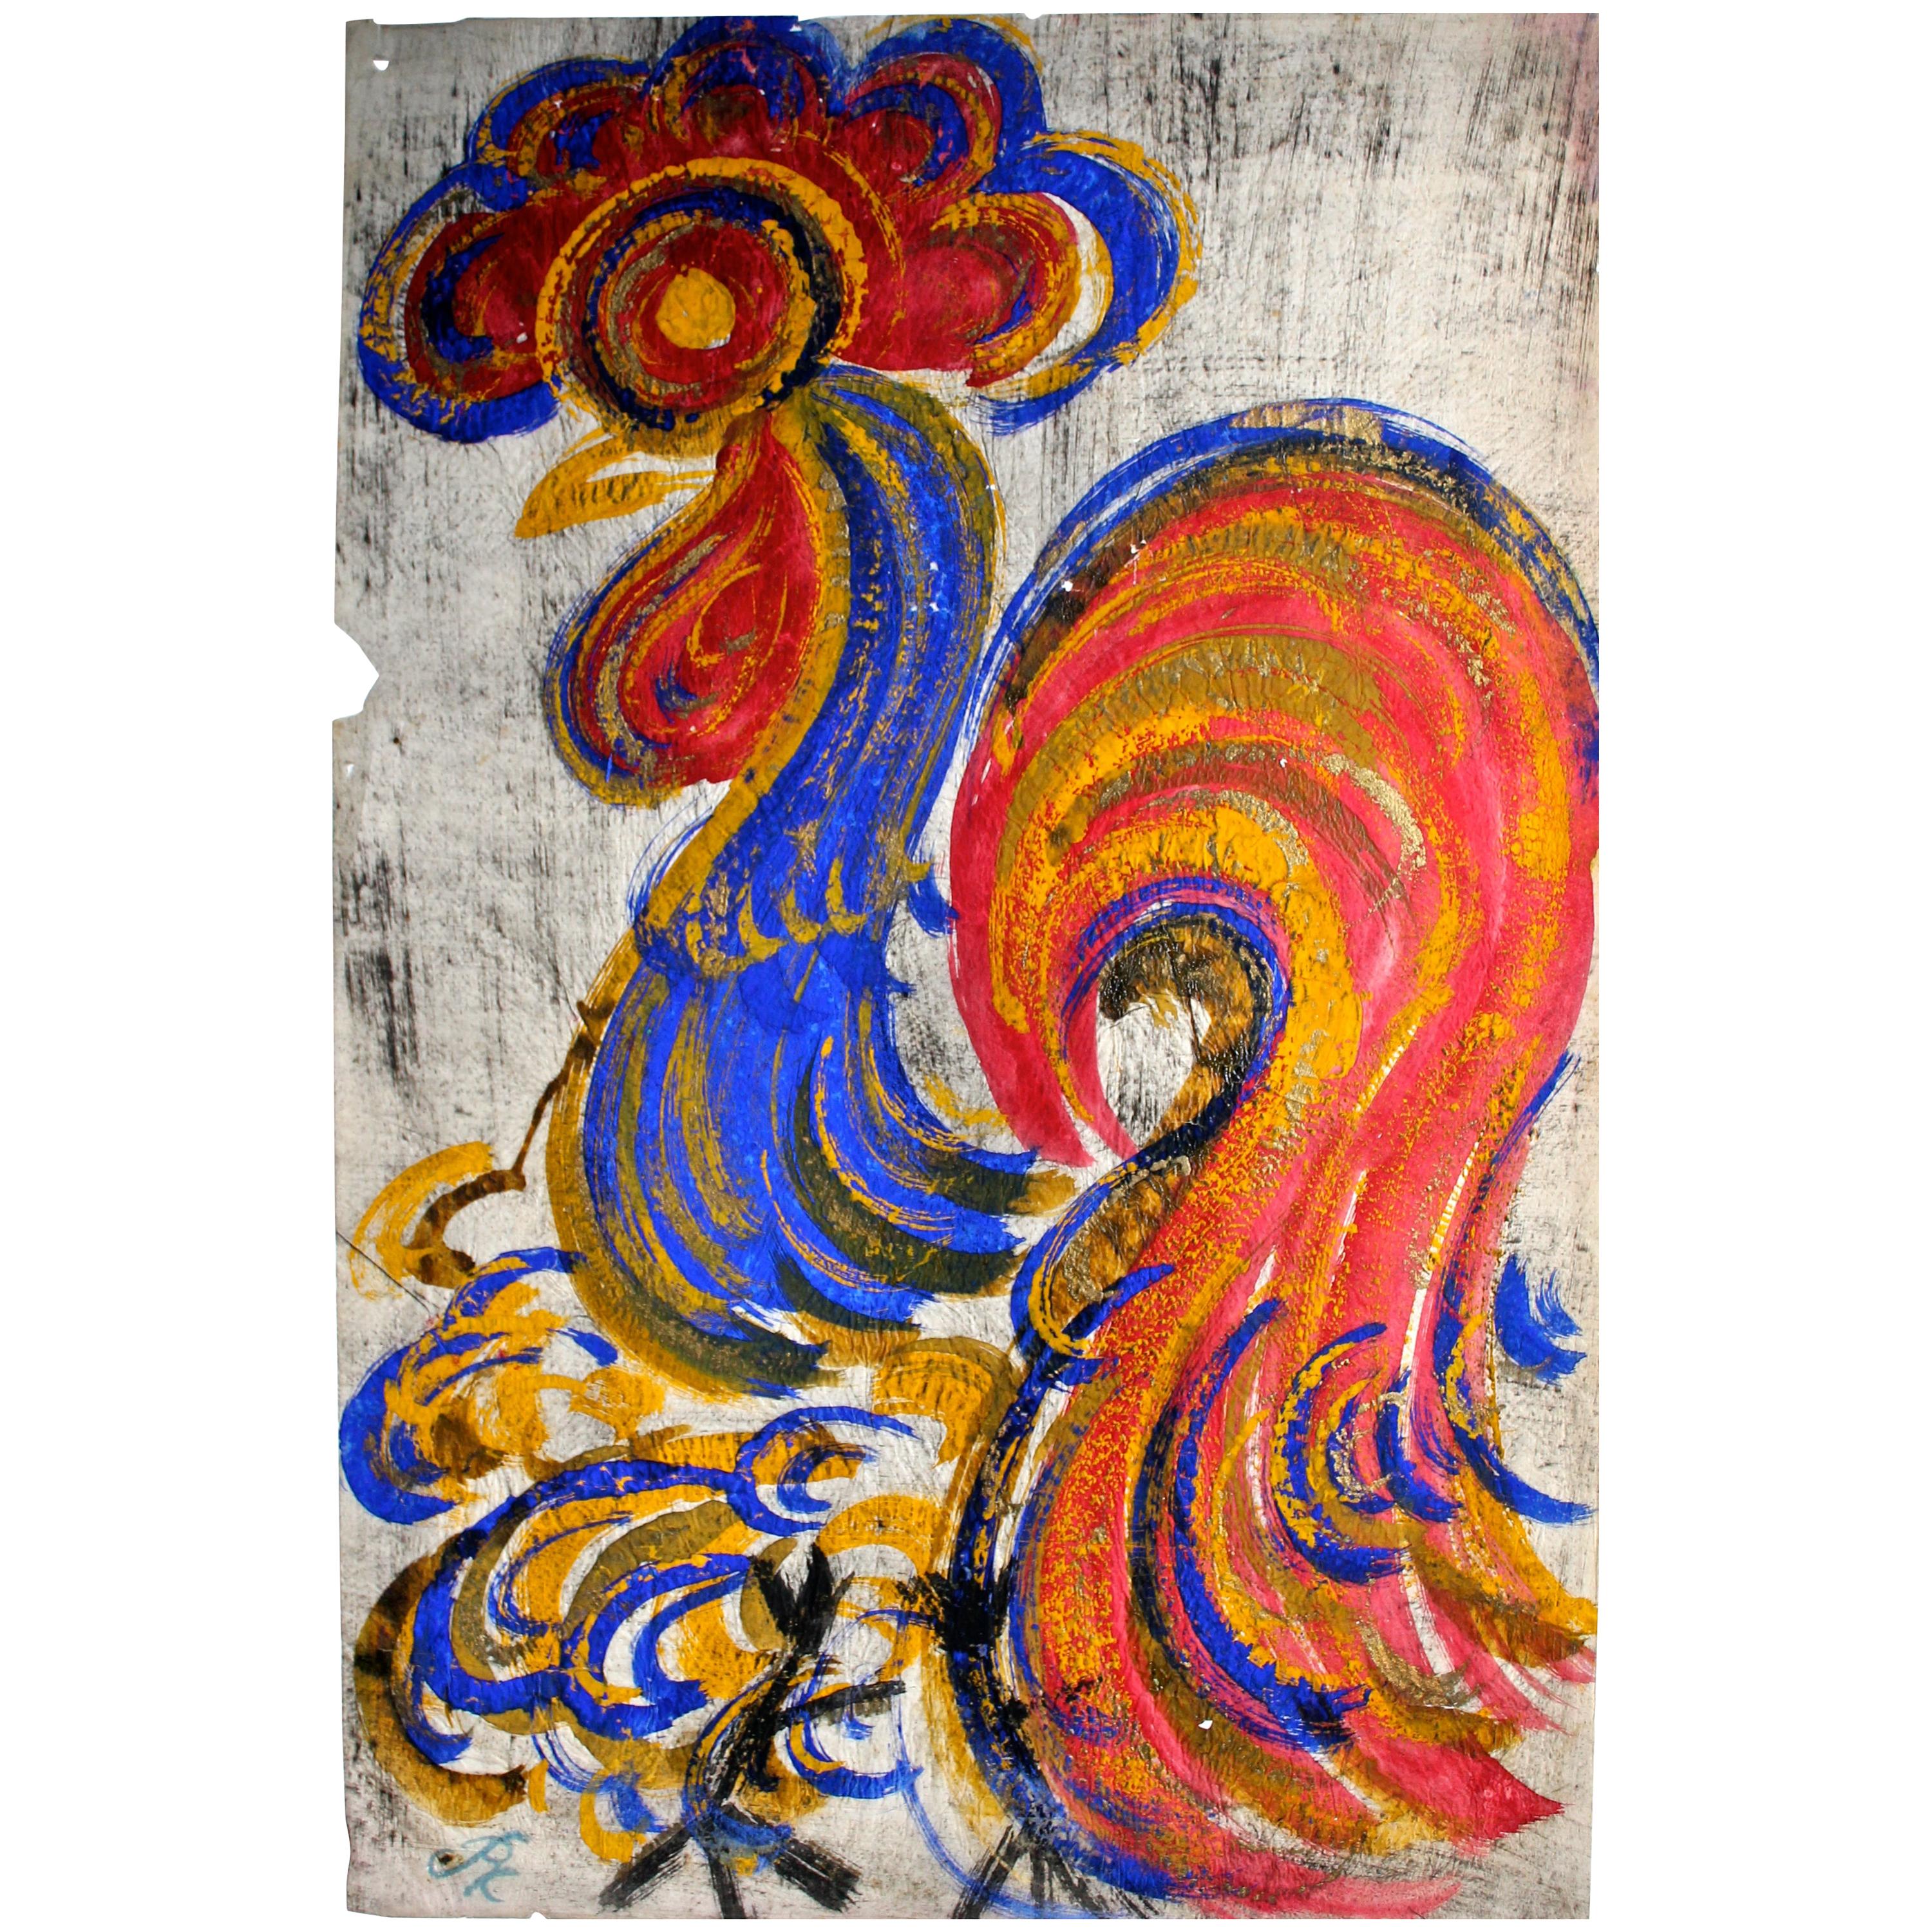 'Chucho' Reyes Signed Gouache on Paper of a Colorful Rooster